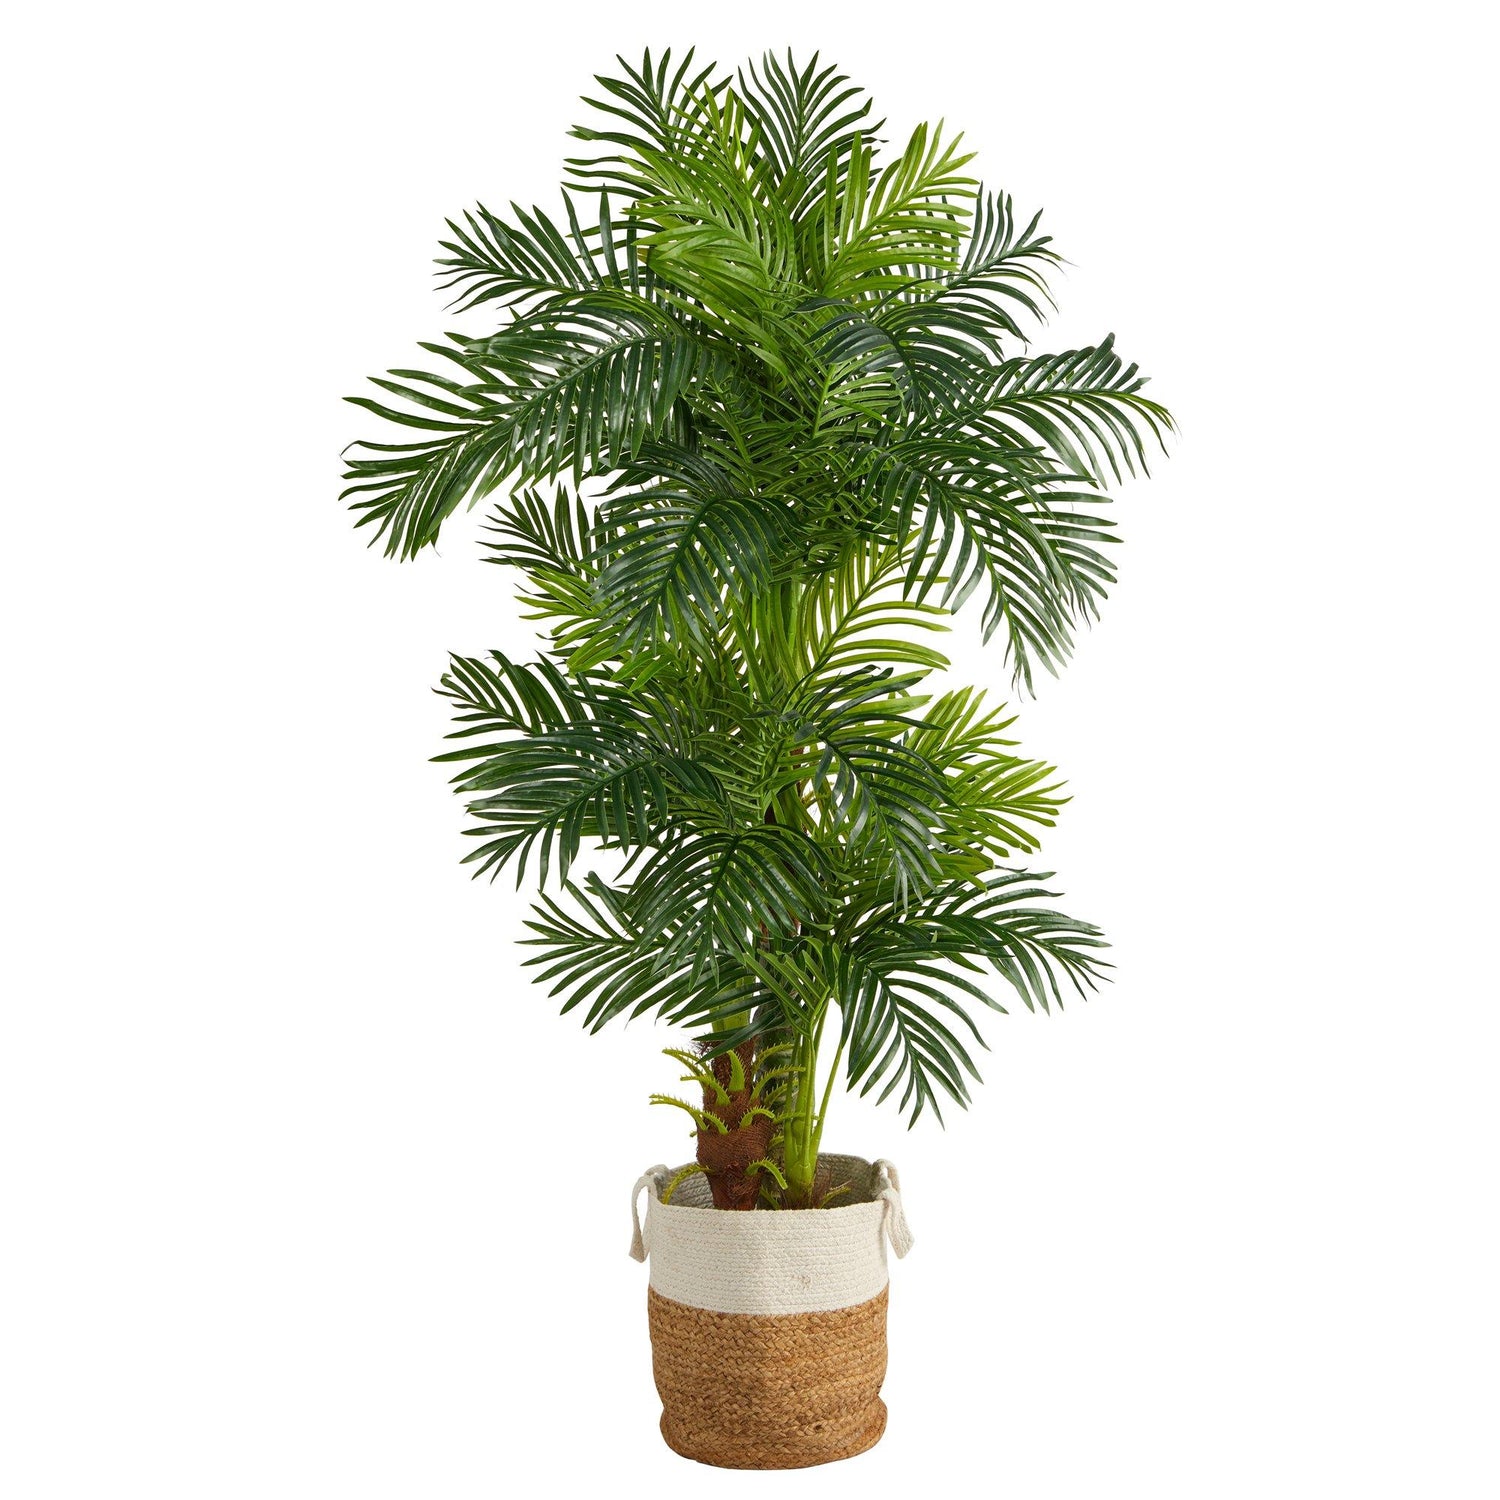 6’ Hawaii Artificial Palm Tree in Handmade Natural Jute and Cotton Planter